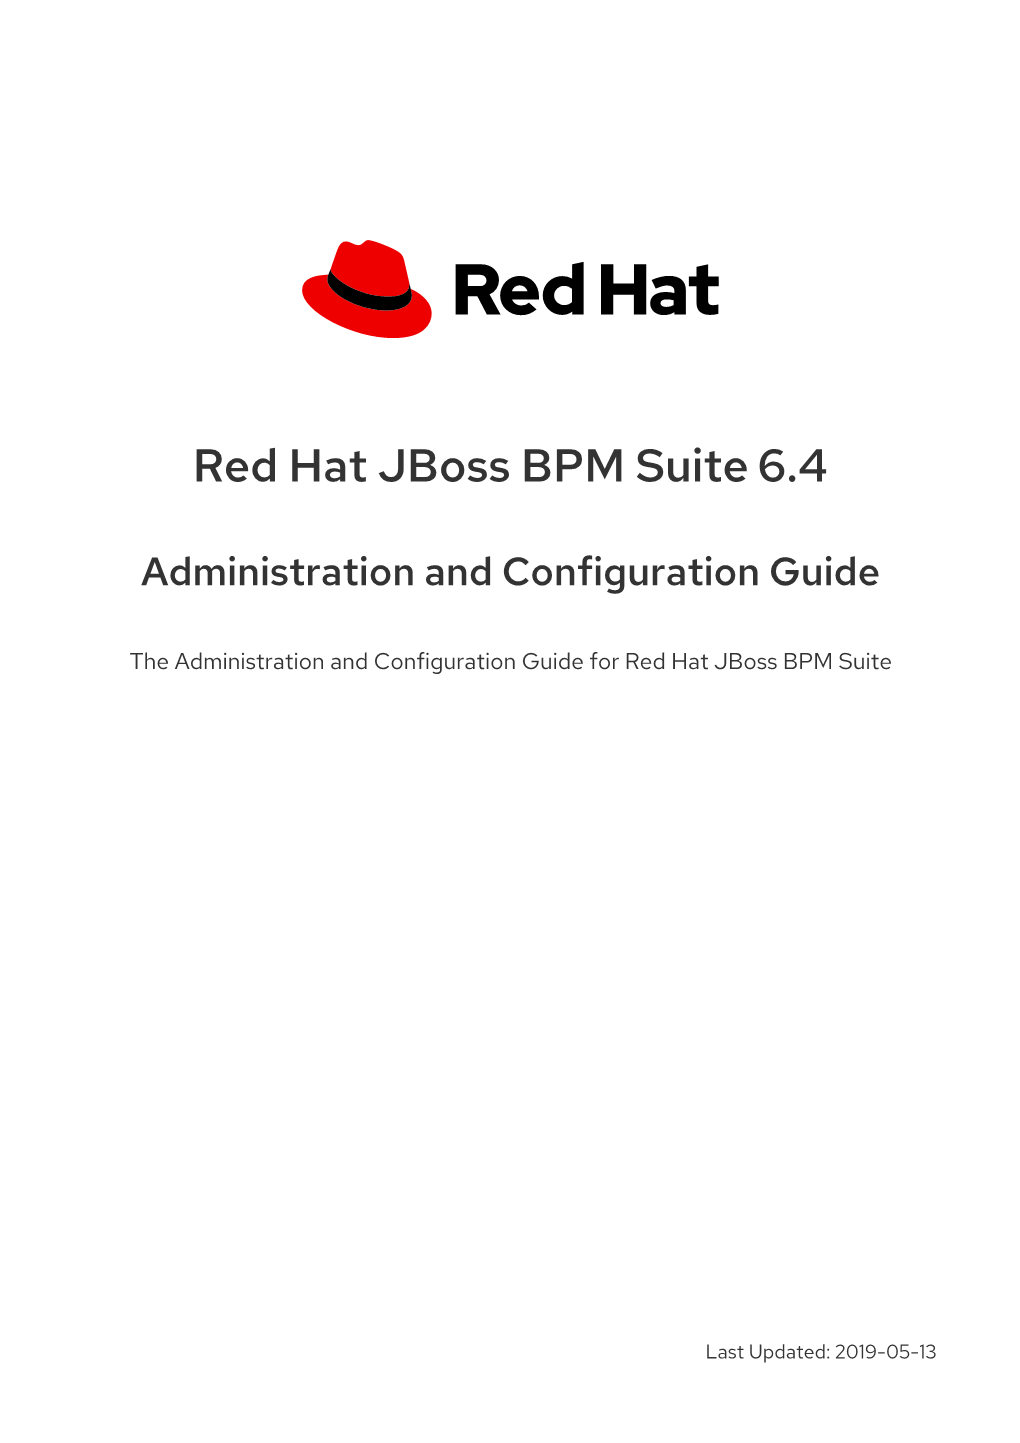 Red Hat Jboss BPM Suite 6.4 Administration and Configuration Guide